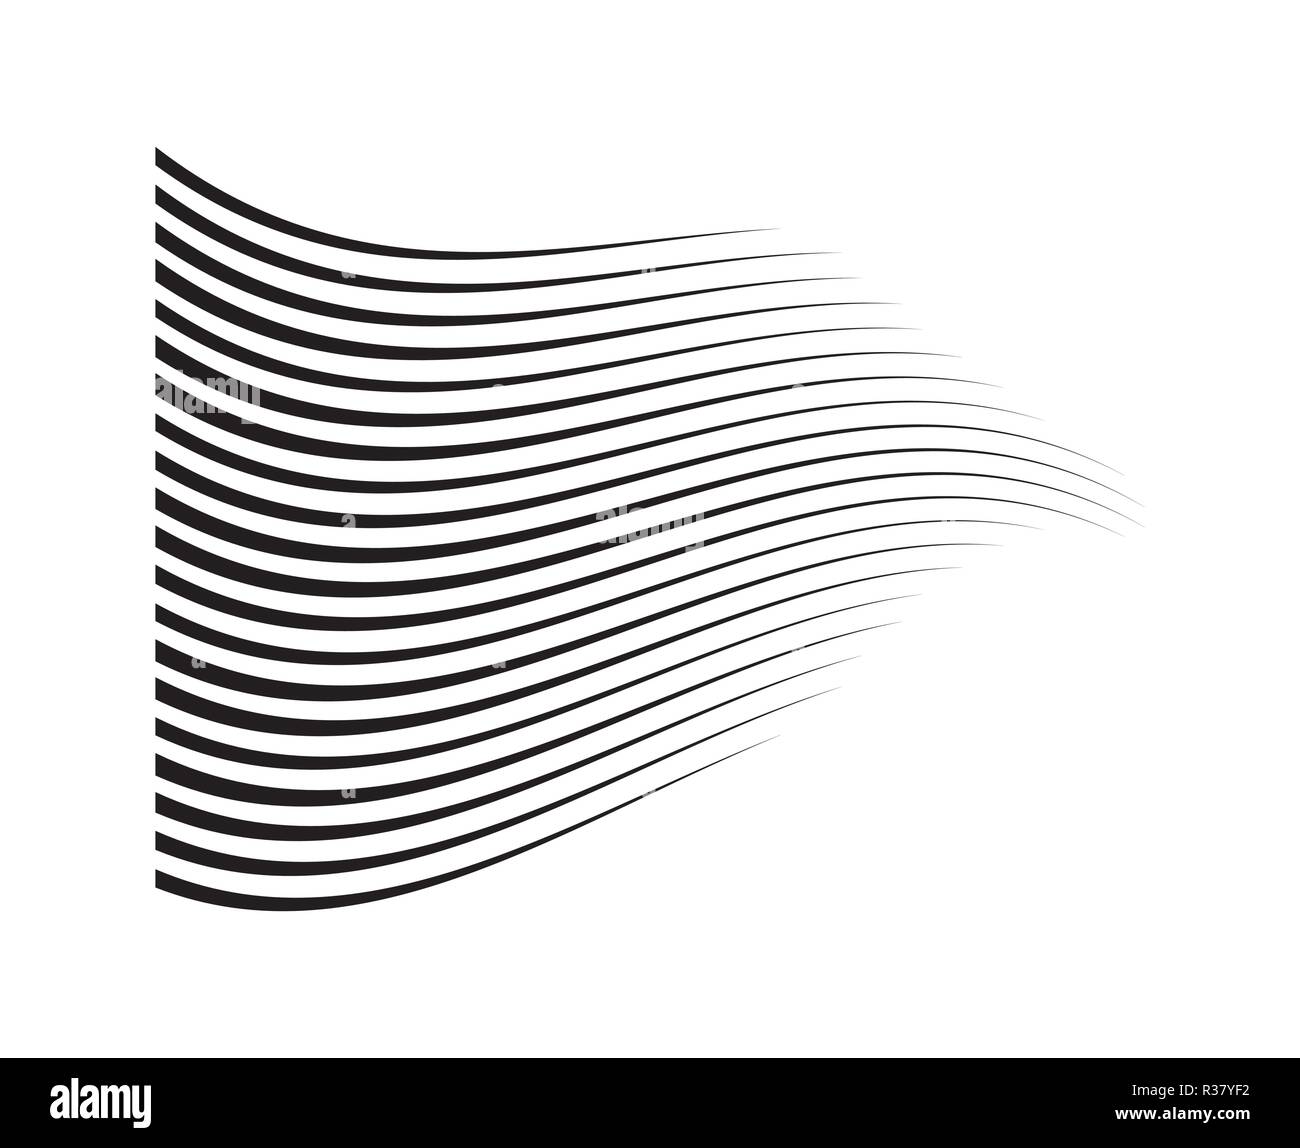 Perspective speed motion lines. wavy horizontal comic manga style abstract background Stock Vector